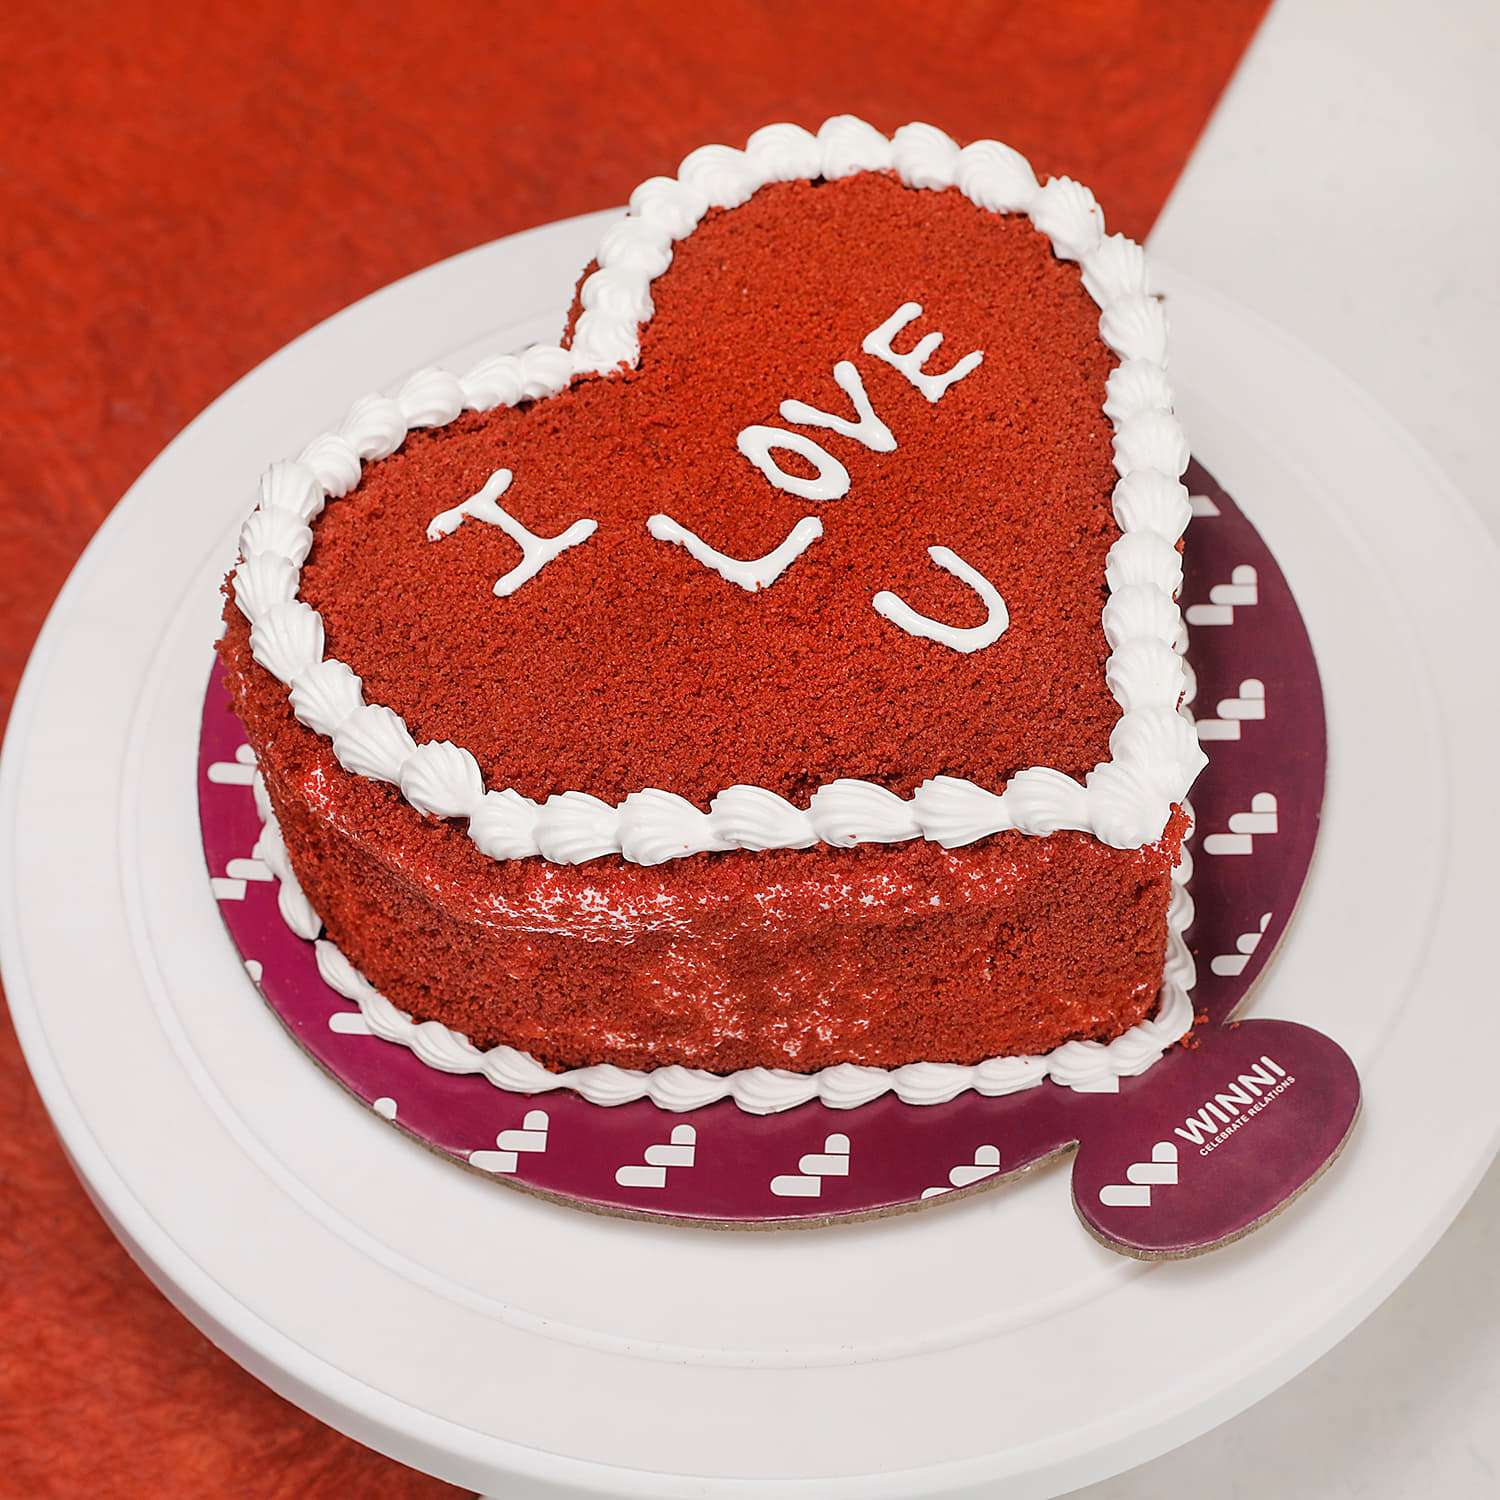 Designer Cakes Ideas for Sweetheart this Valentine's Day - Kingdom of Cakes